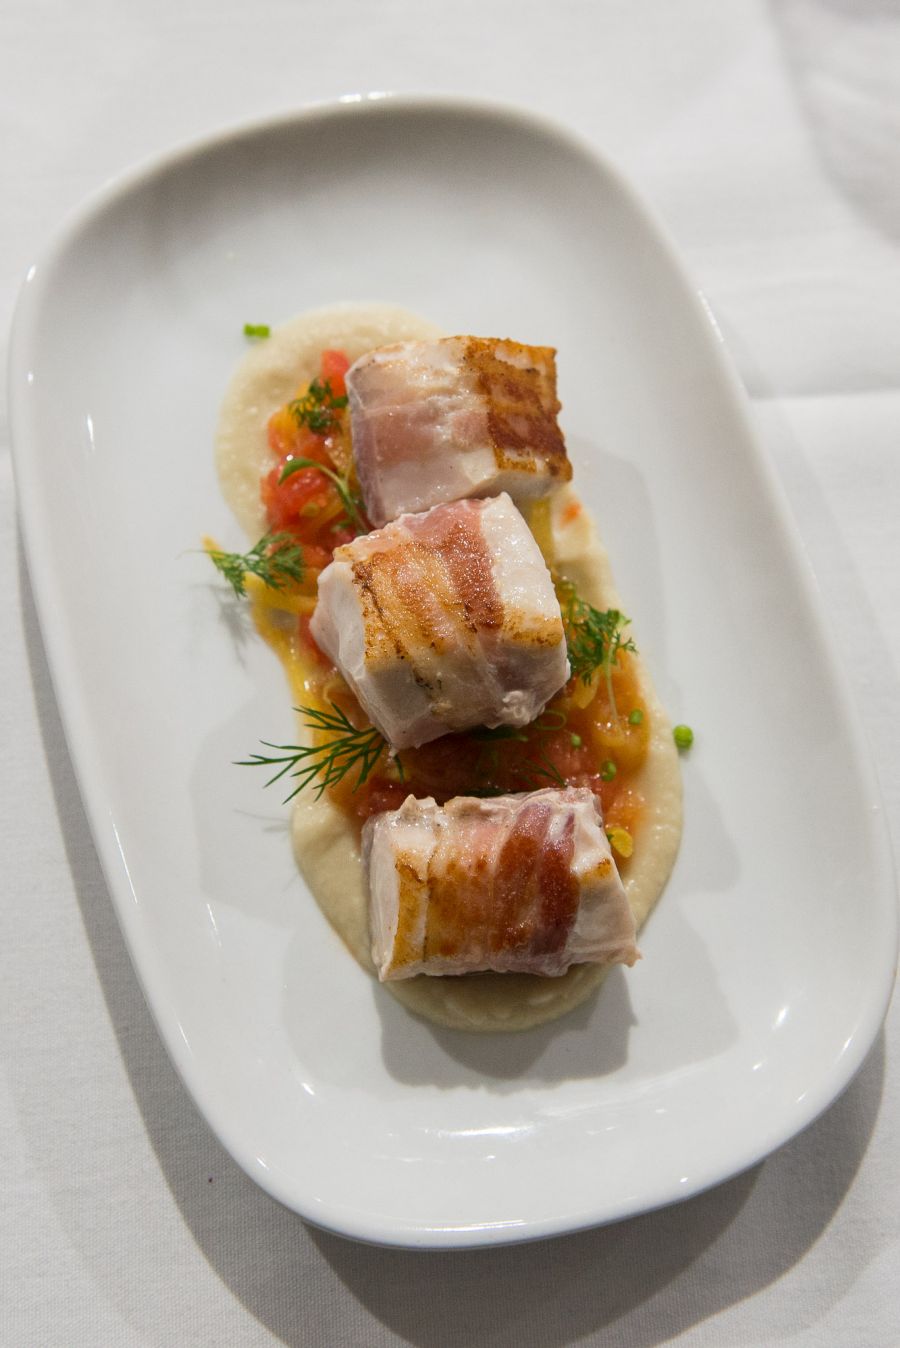 Third course: pancetta wrapped kingfish, warmed tomato and saffron, young fennel and soft herbs